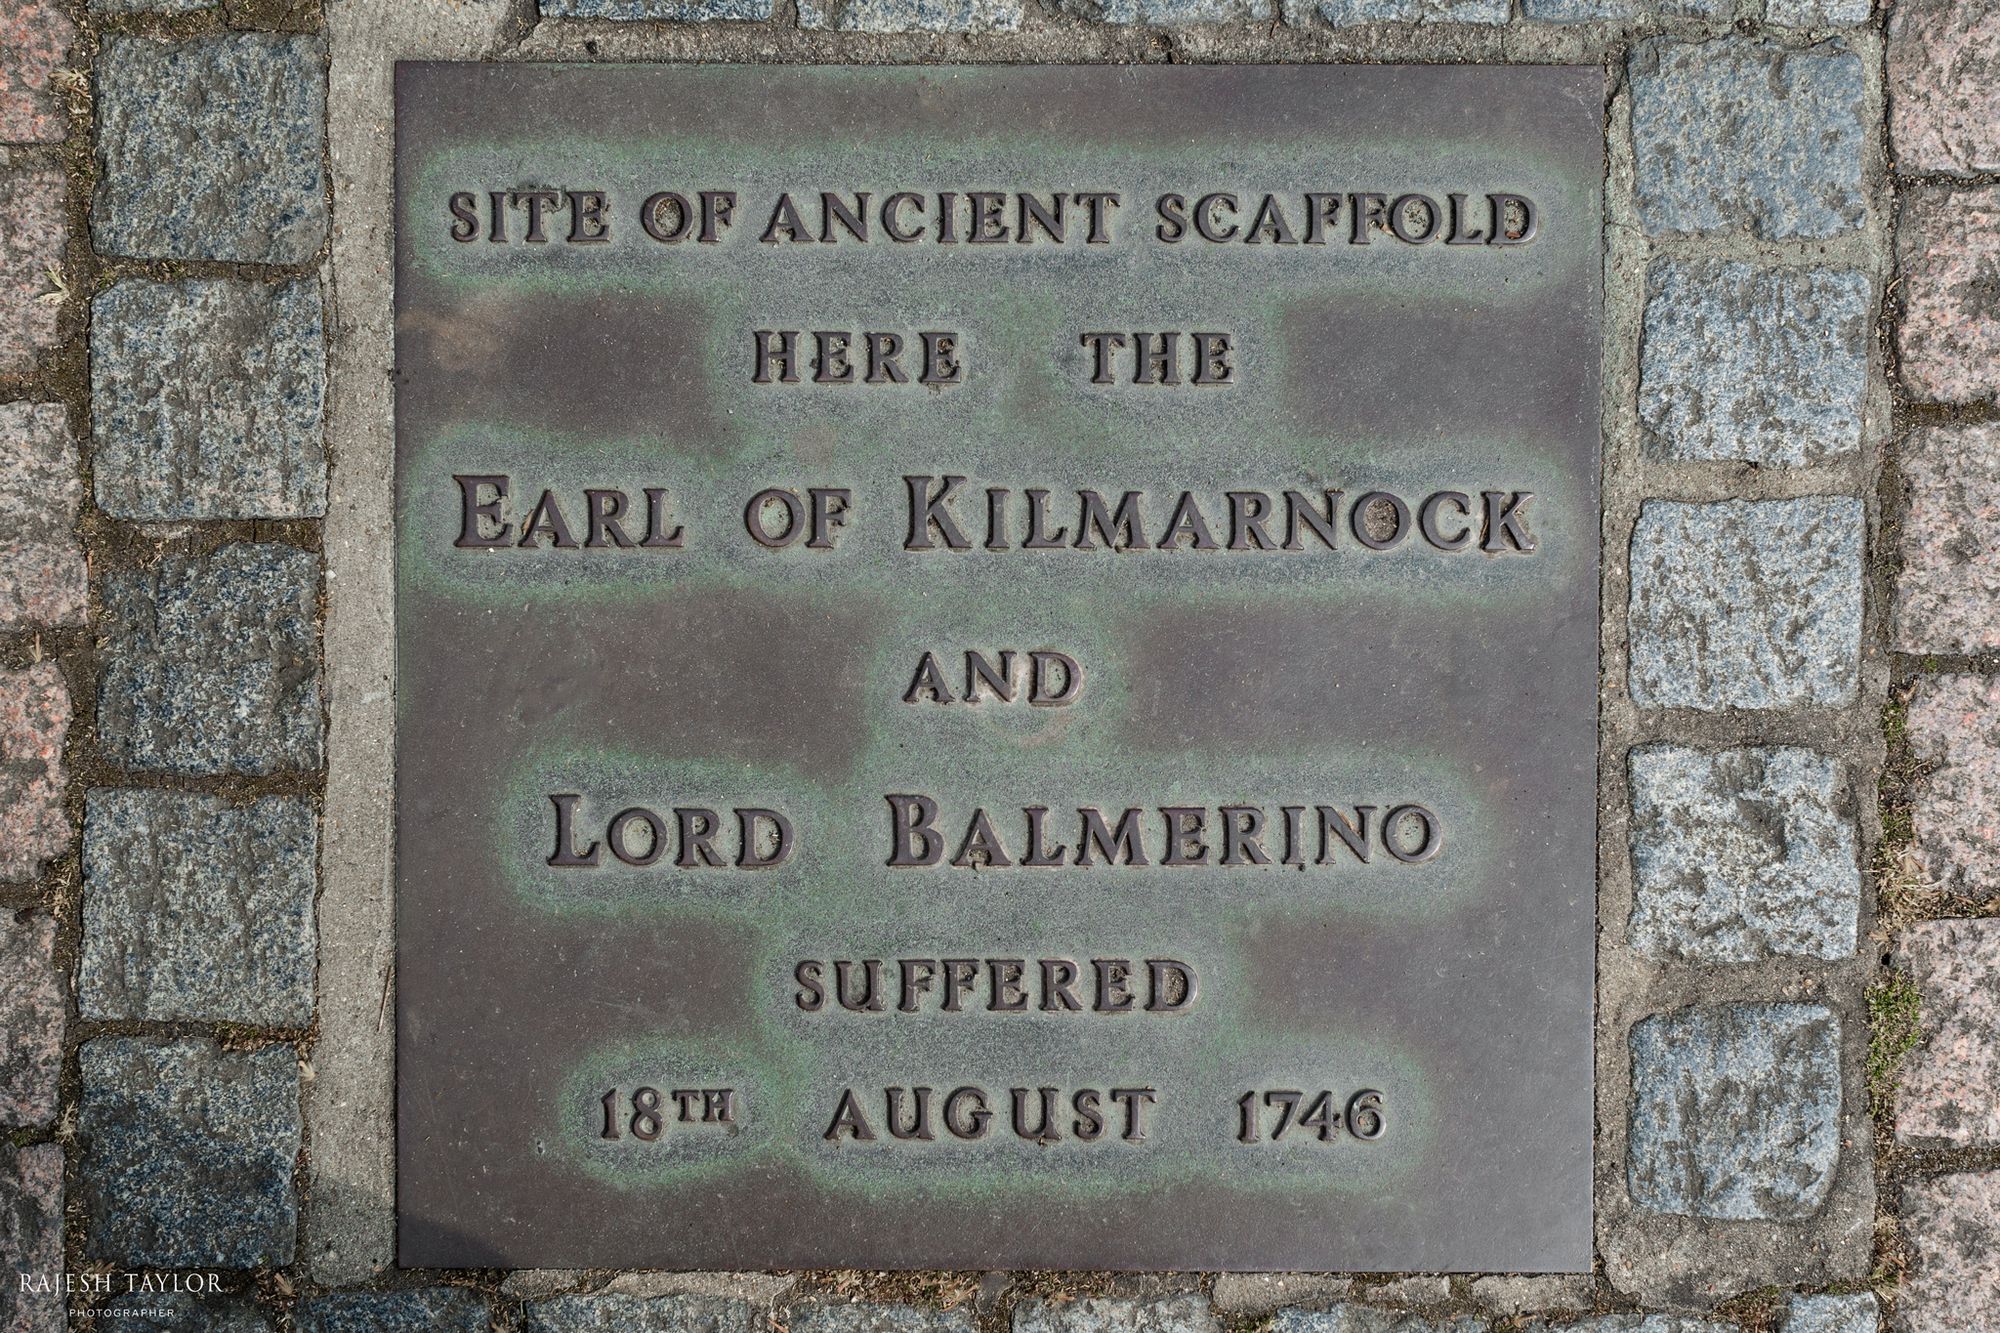 Memorial to Earl Kilmarnock and Lord Balmerino at Site of the Scaffold, Tower Hill © Rajesh Taylor